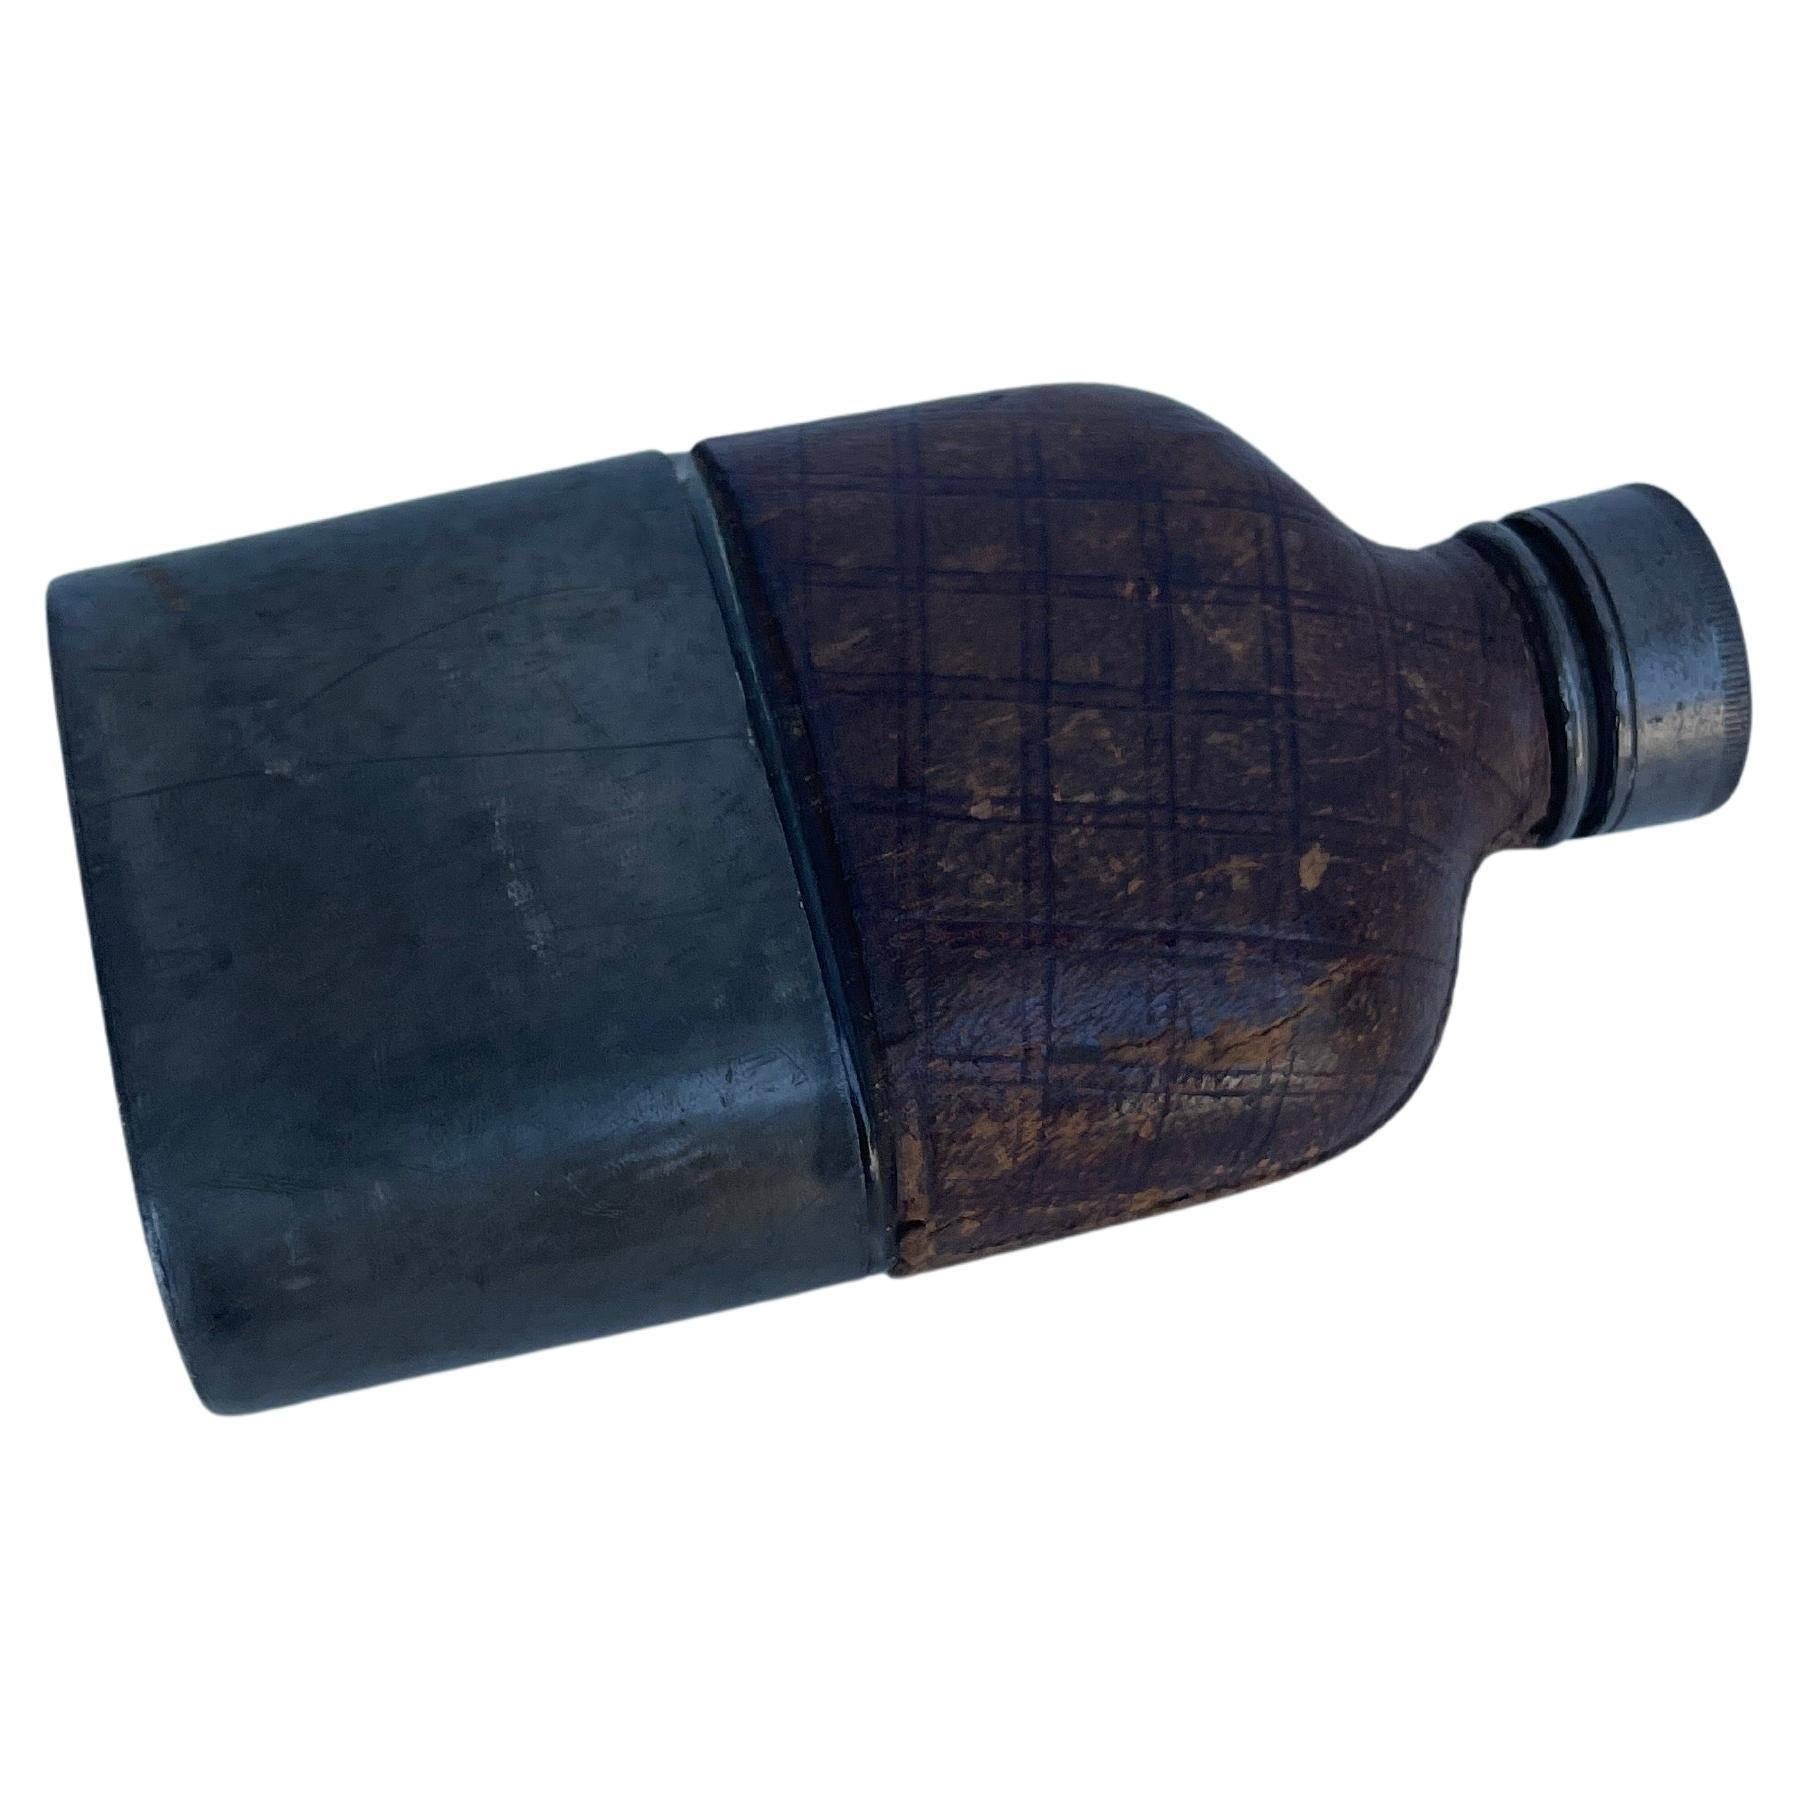 Military Pewter Leather Pocket Hip Flask, Civil War Era, circa 1890

Heavy glass flask wrapped in the original weathered brown leather at the top. The bottom of the flask slides into an oval pewter base which also functions as a cup. The mouth of